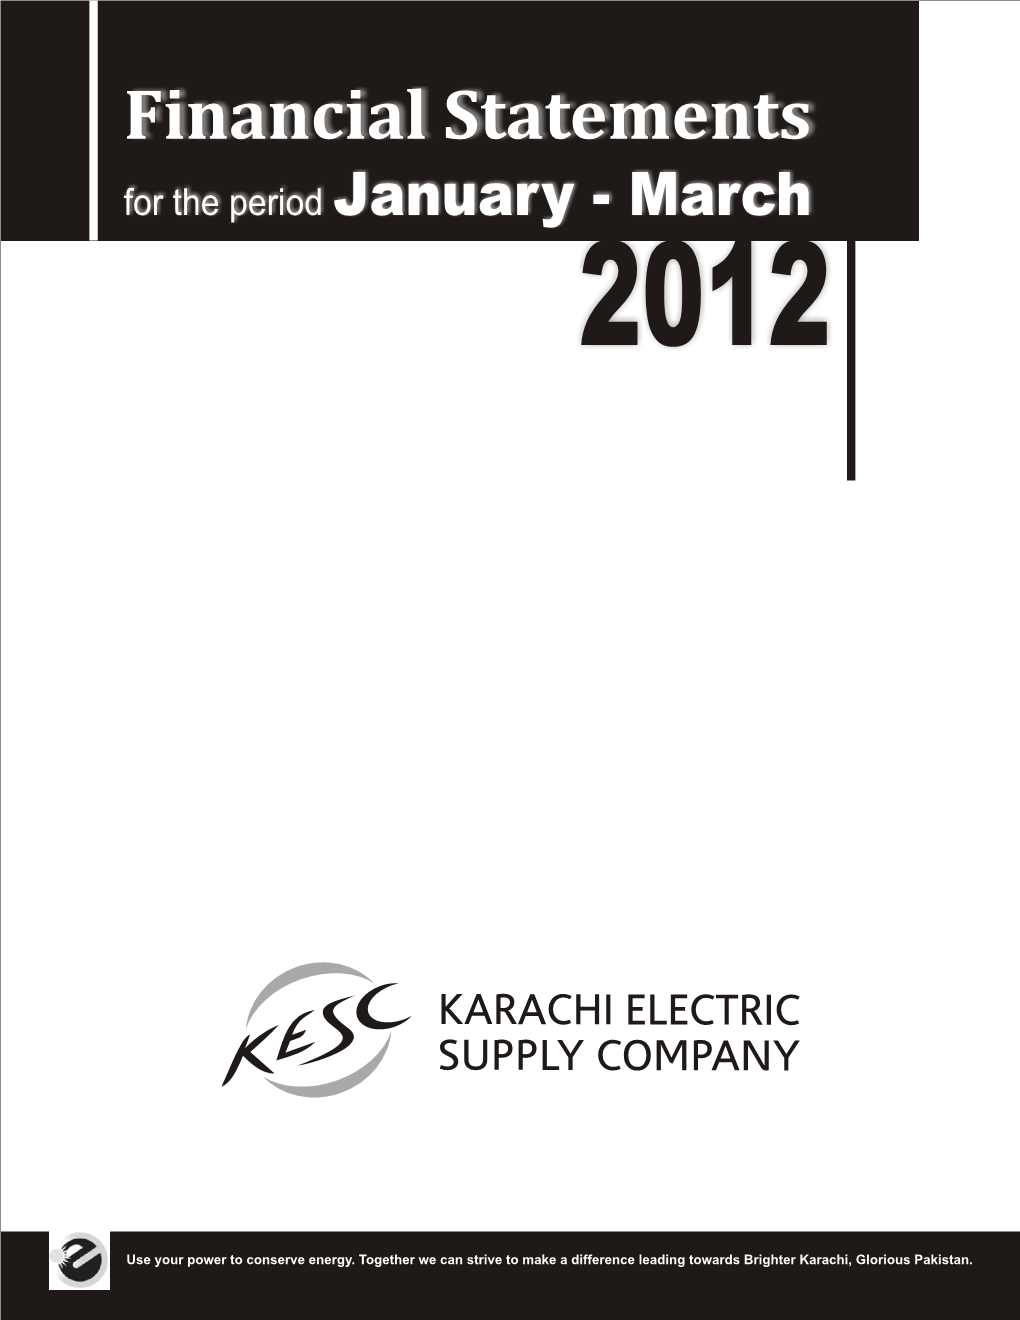 Financial Statements January - March for the Period 2012